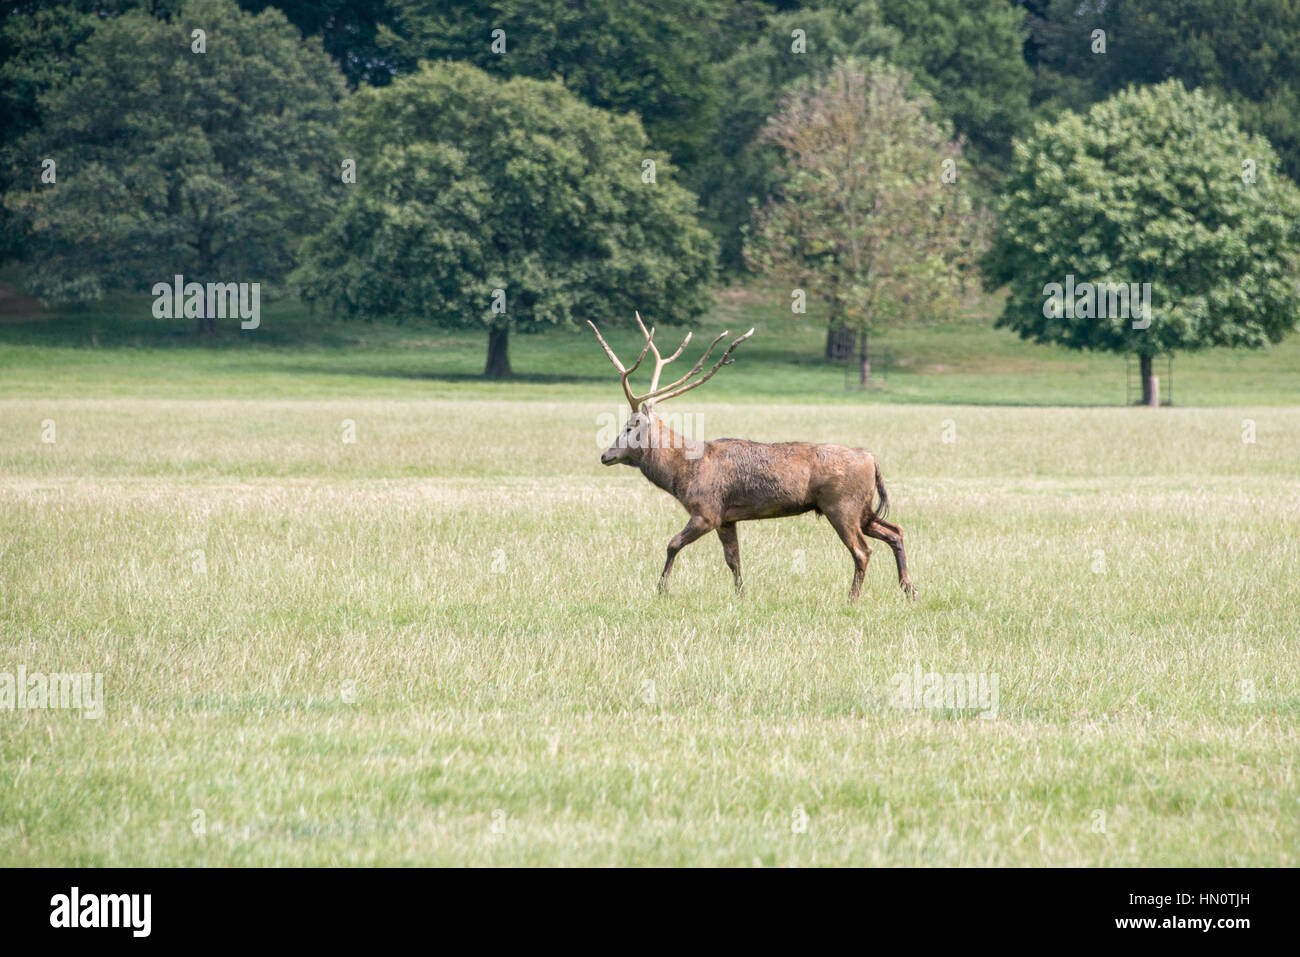 A red deer stag walking through a field at Woburn abbey, UK Stock Photo